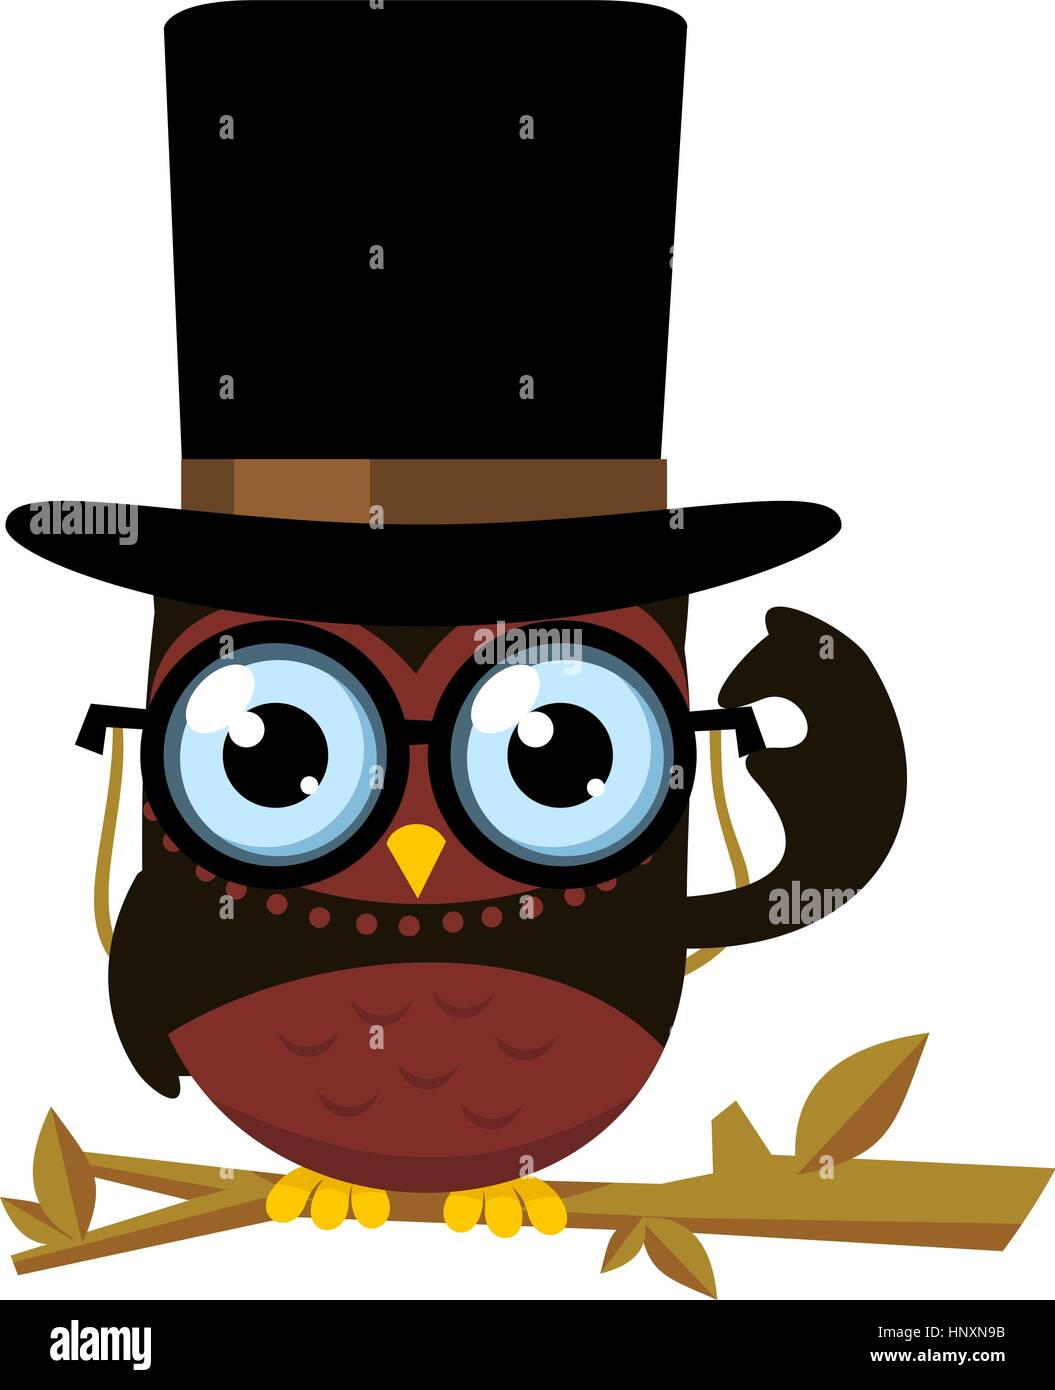 Wise Intelligent Standing Owl Front view Top Hat Glasses, vector illustration. Stock Vector